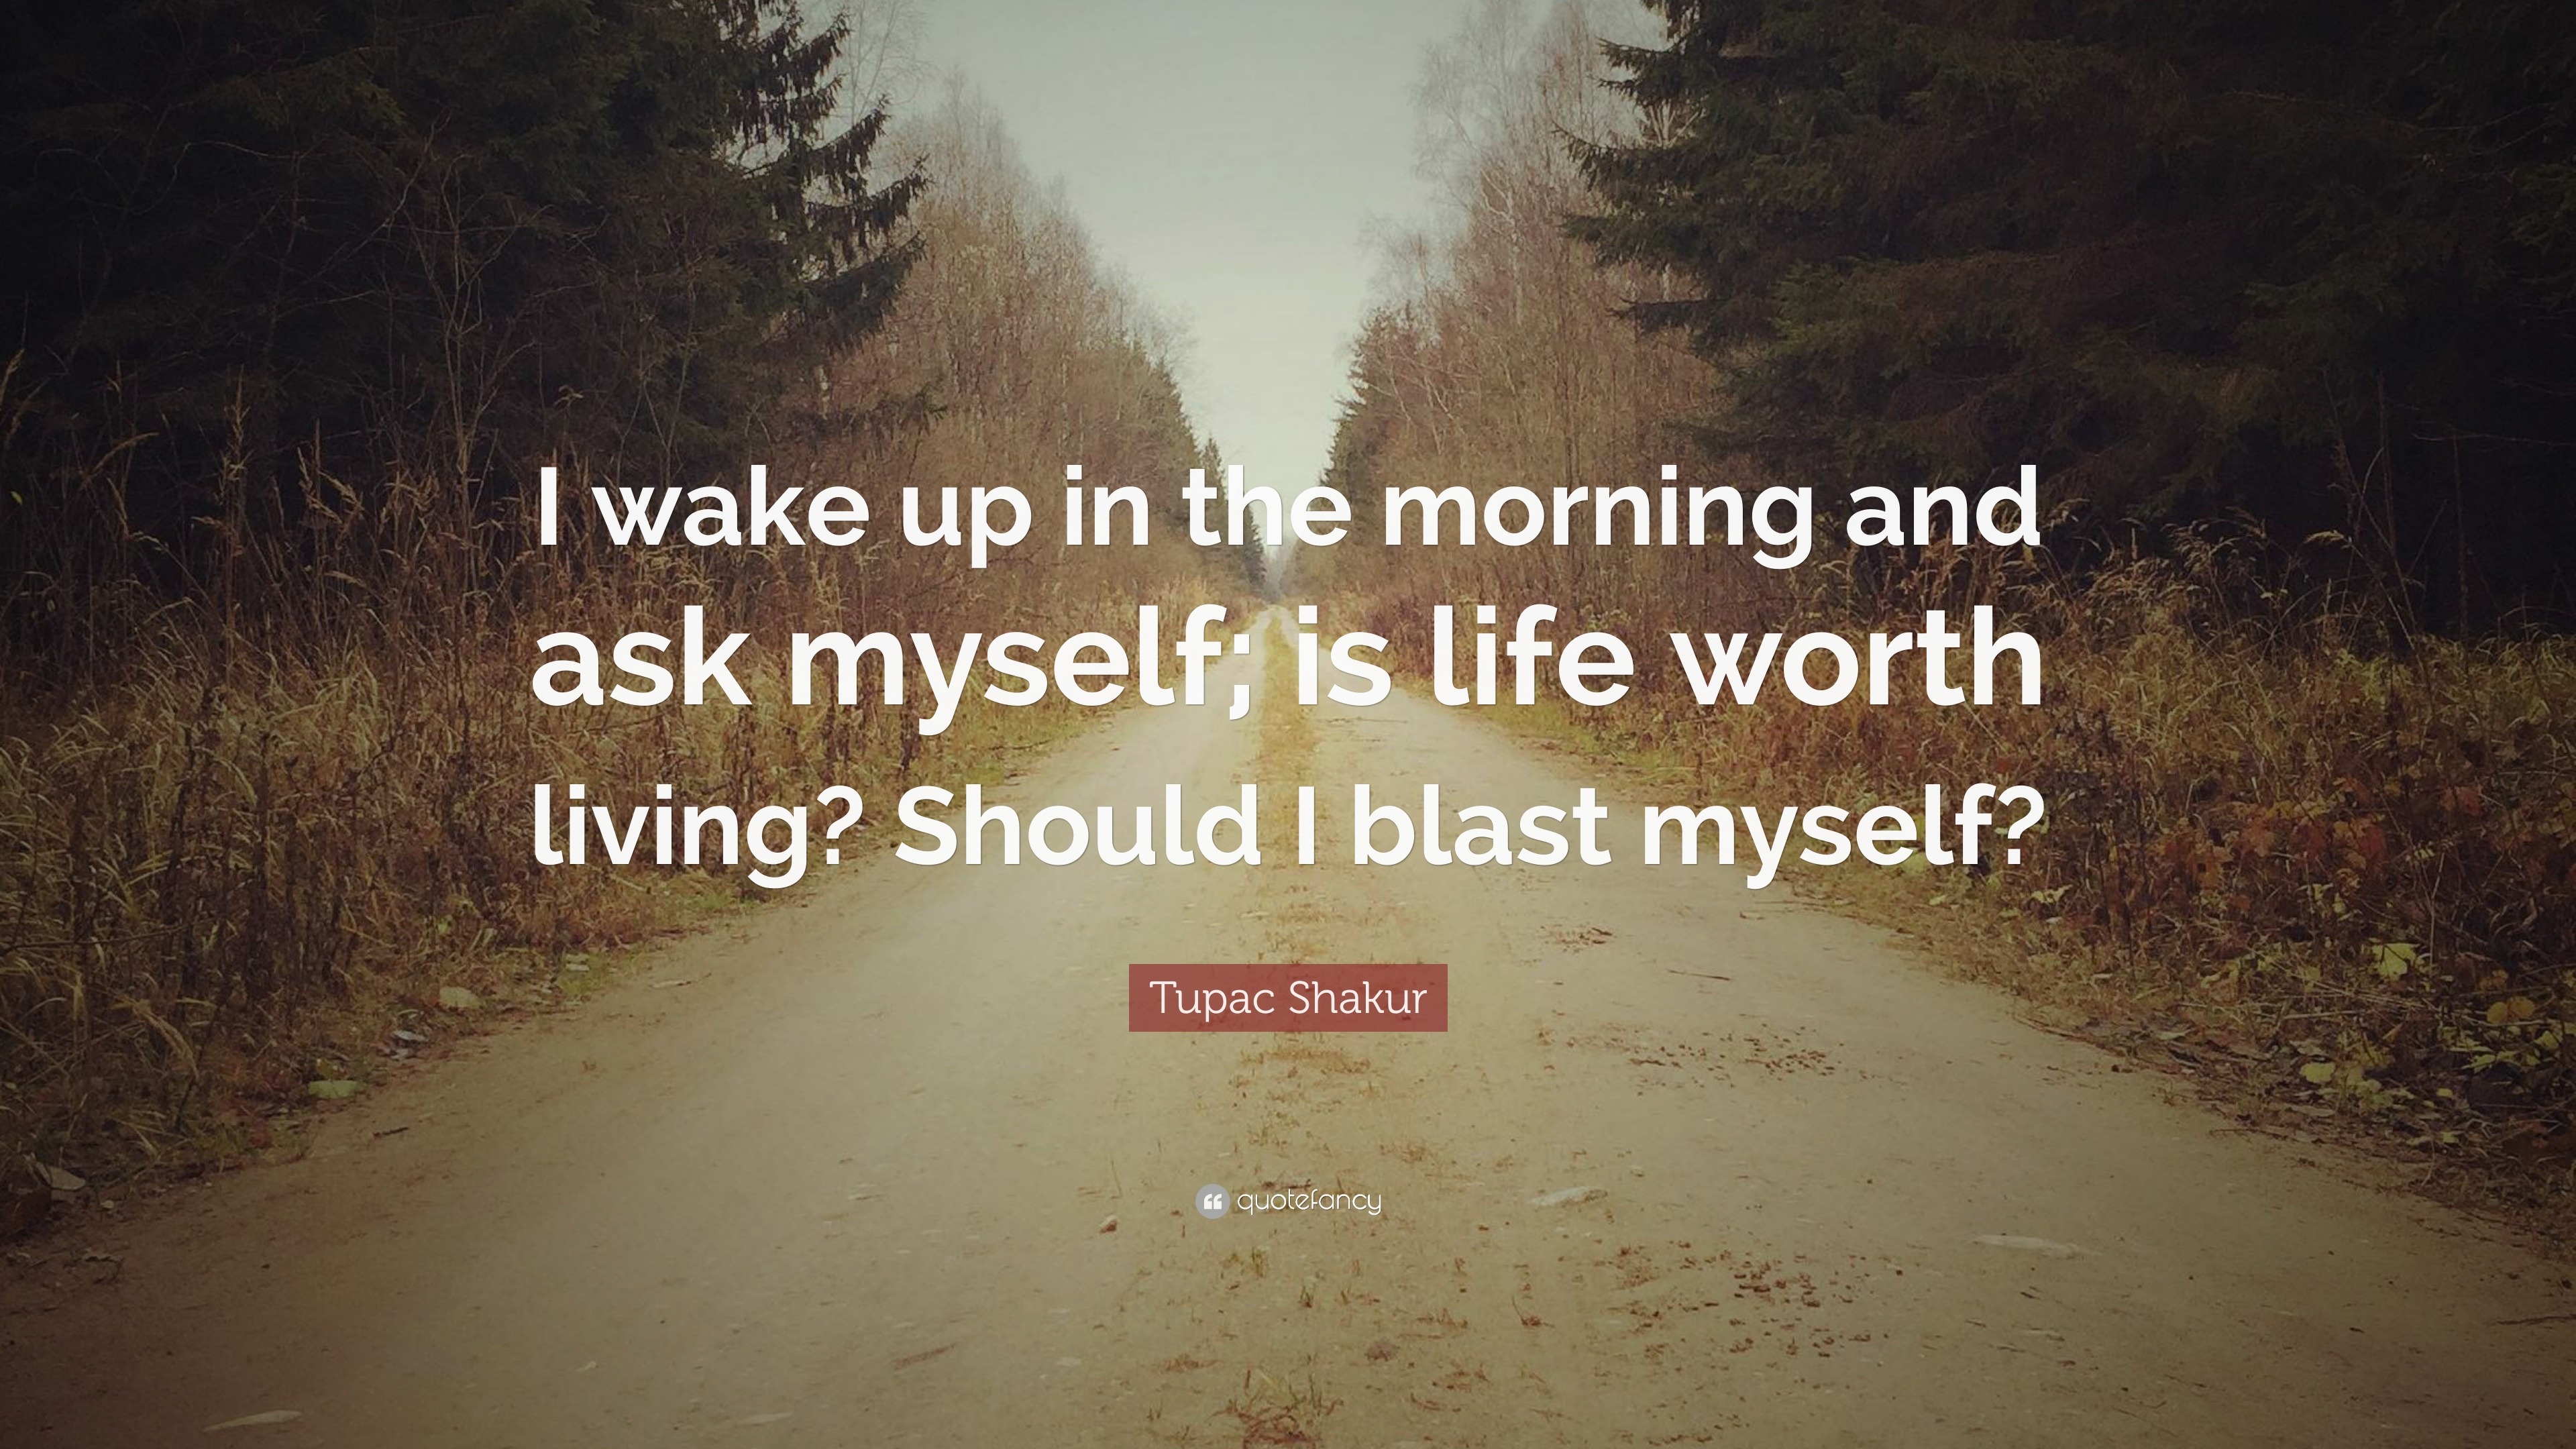 Tupac Shakur Quote “I wake up in the morning and ask myself is